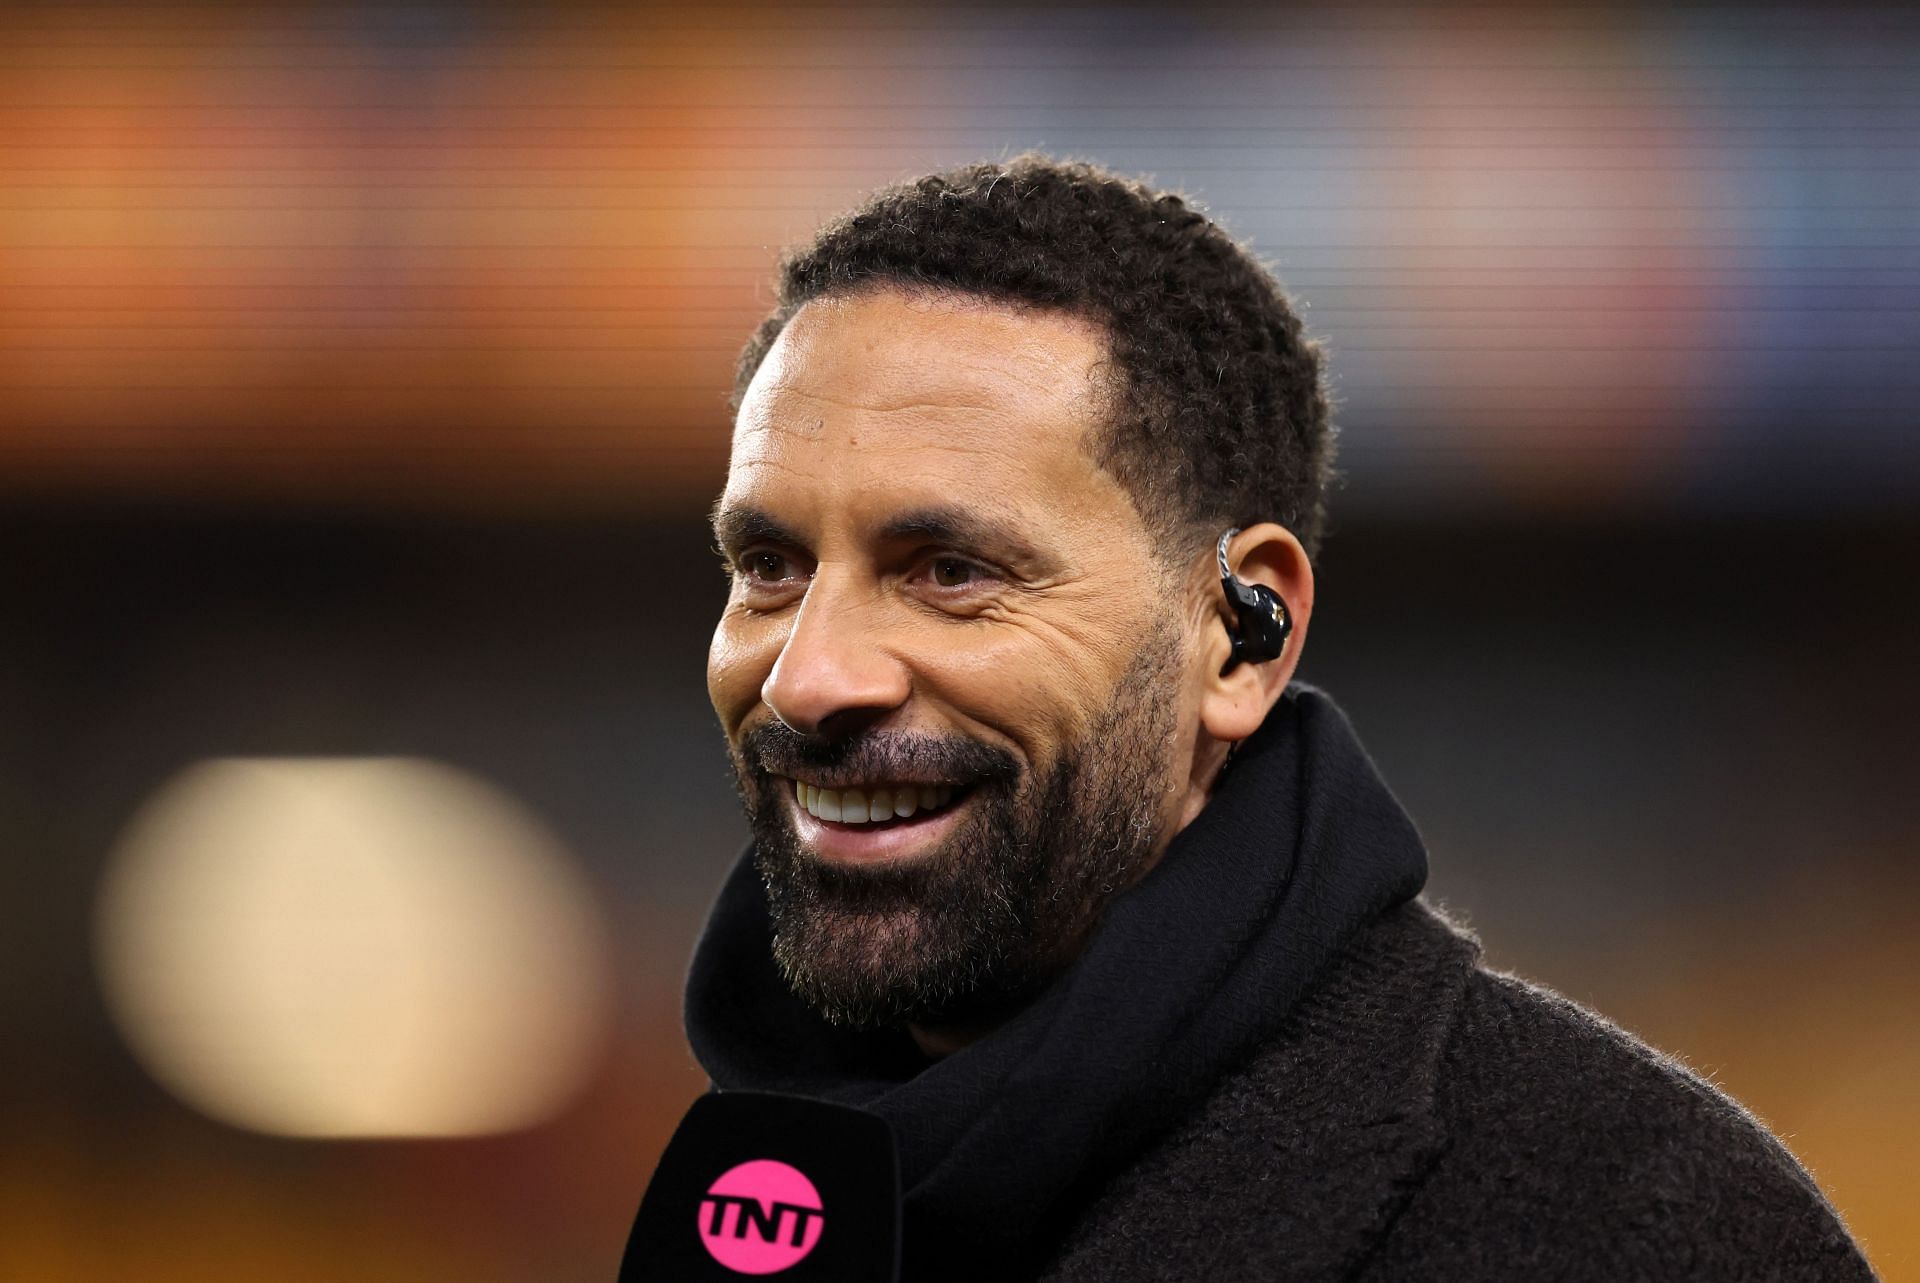 Rio Ferdinand mocked Jamie Carragher after the FA Cup victory.